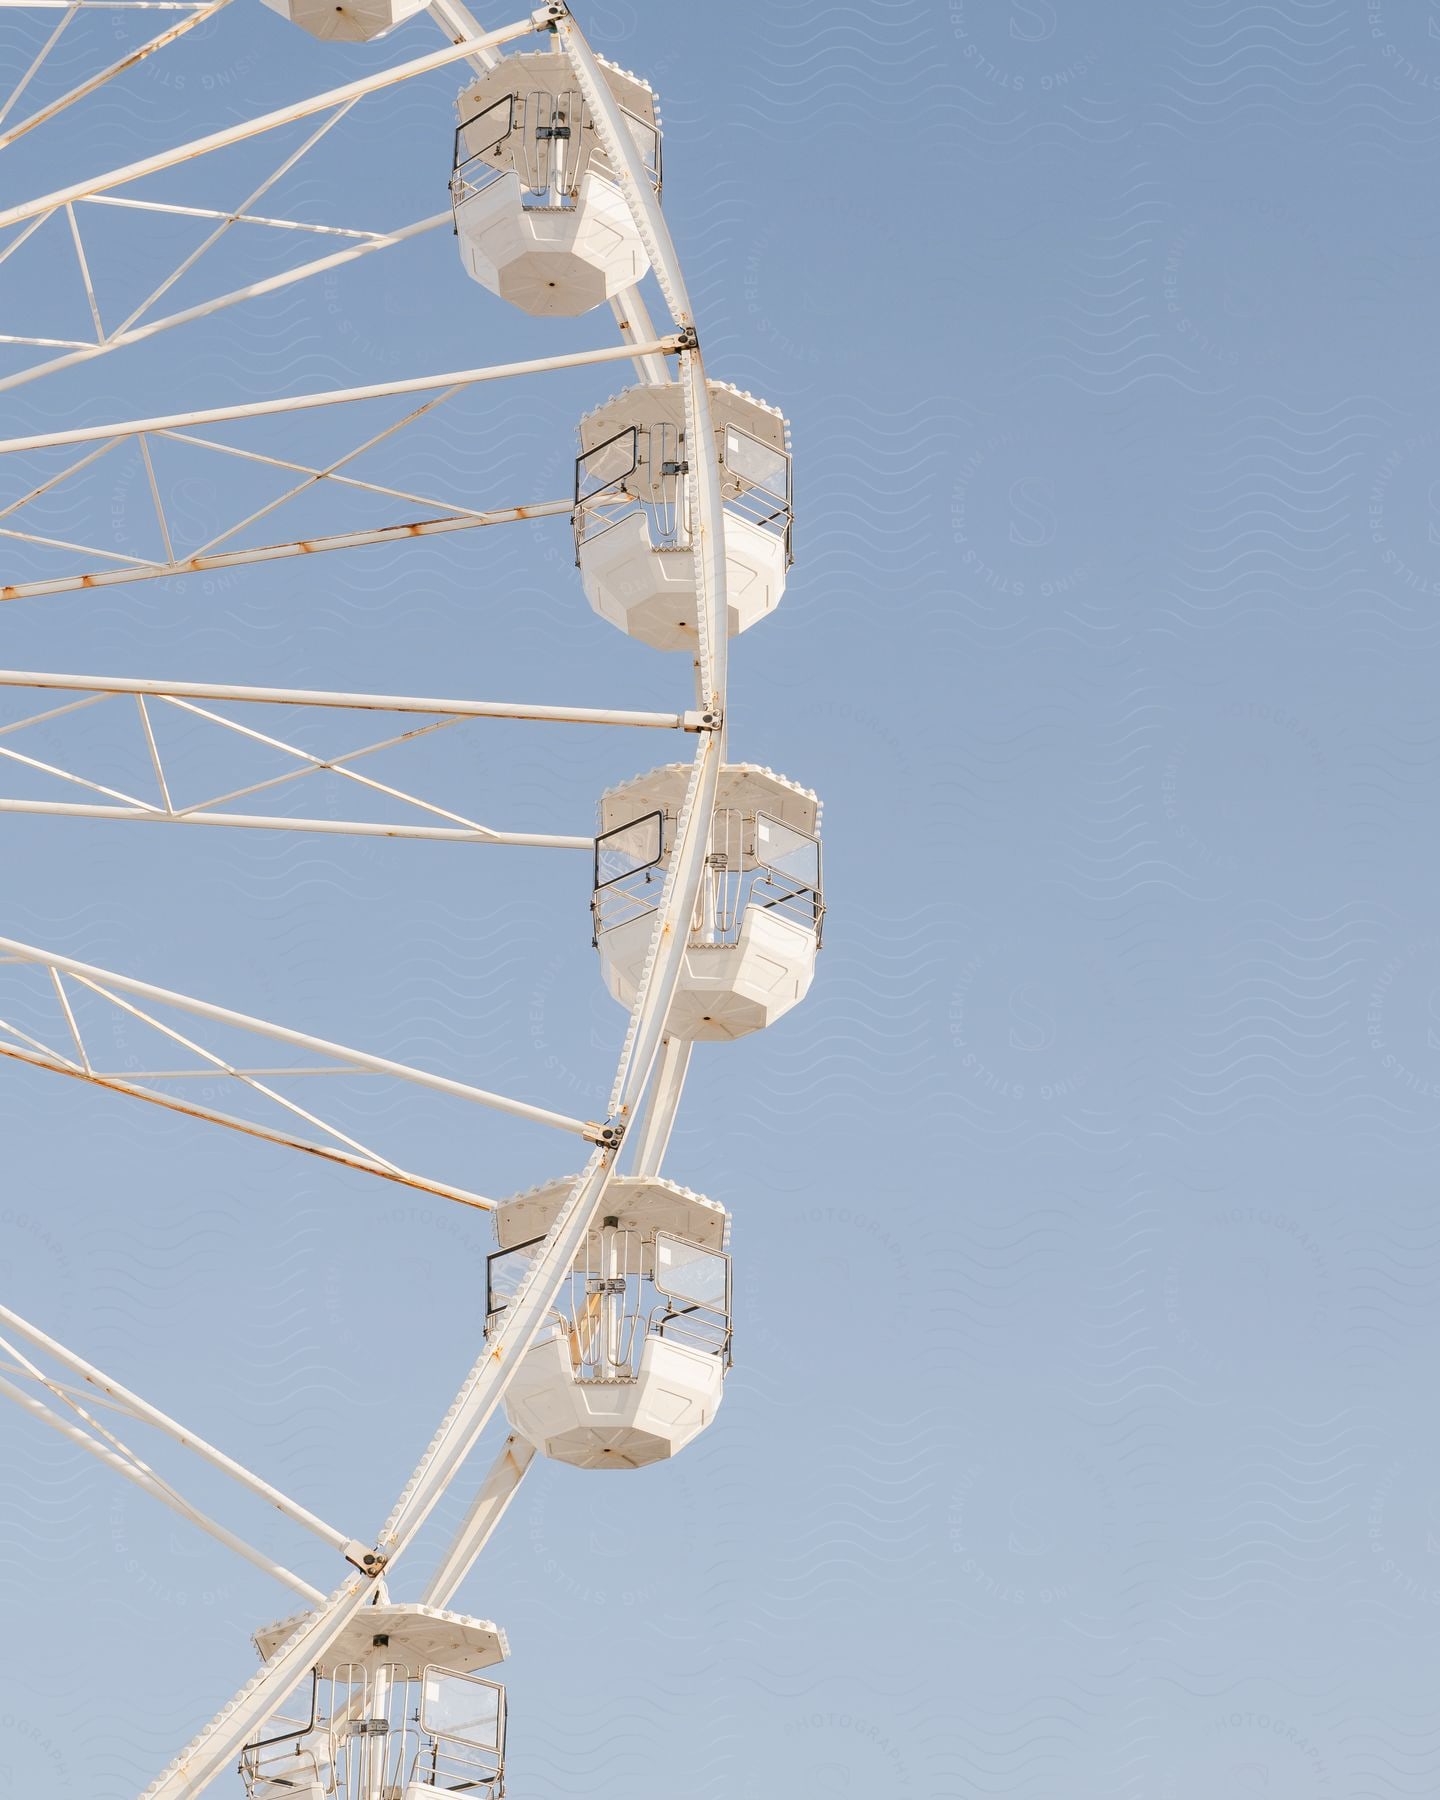 A white ferris wheel in contrast to a clear blue sky